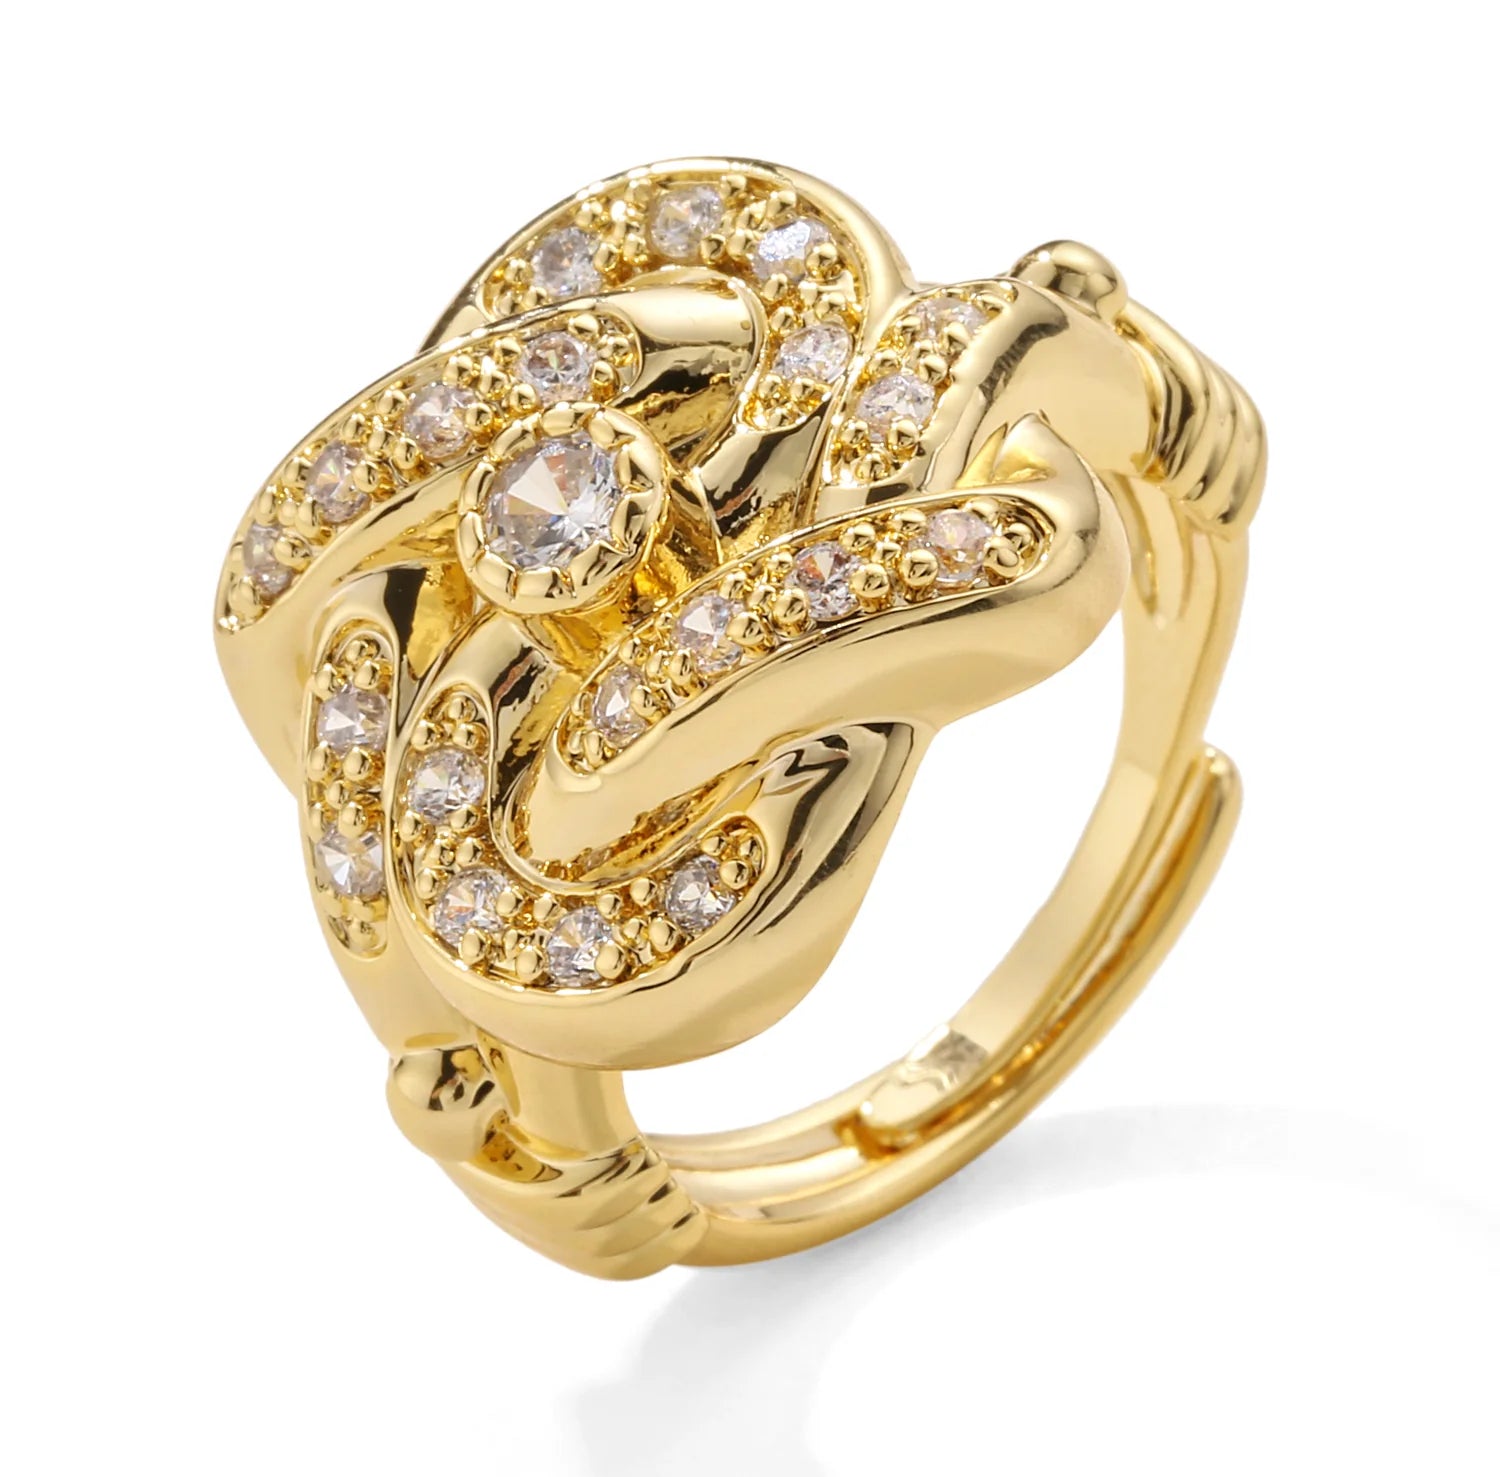 GOLD KNOT RING WITH STONES